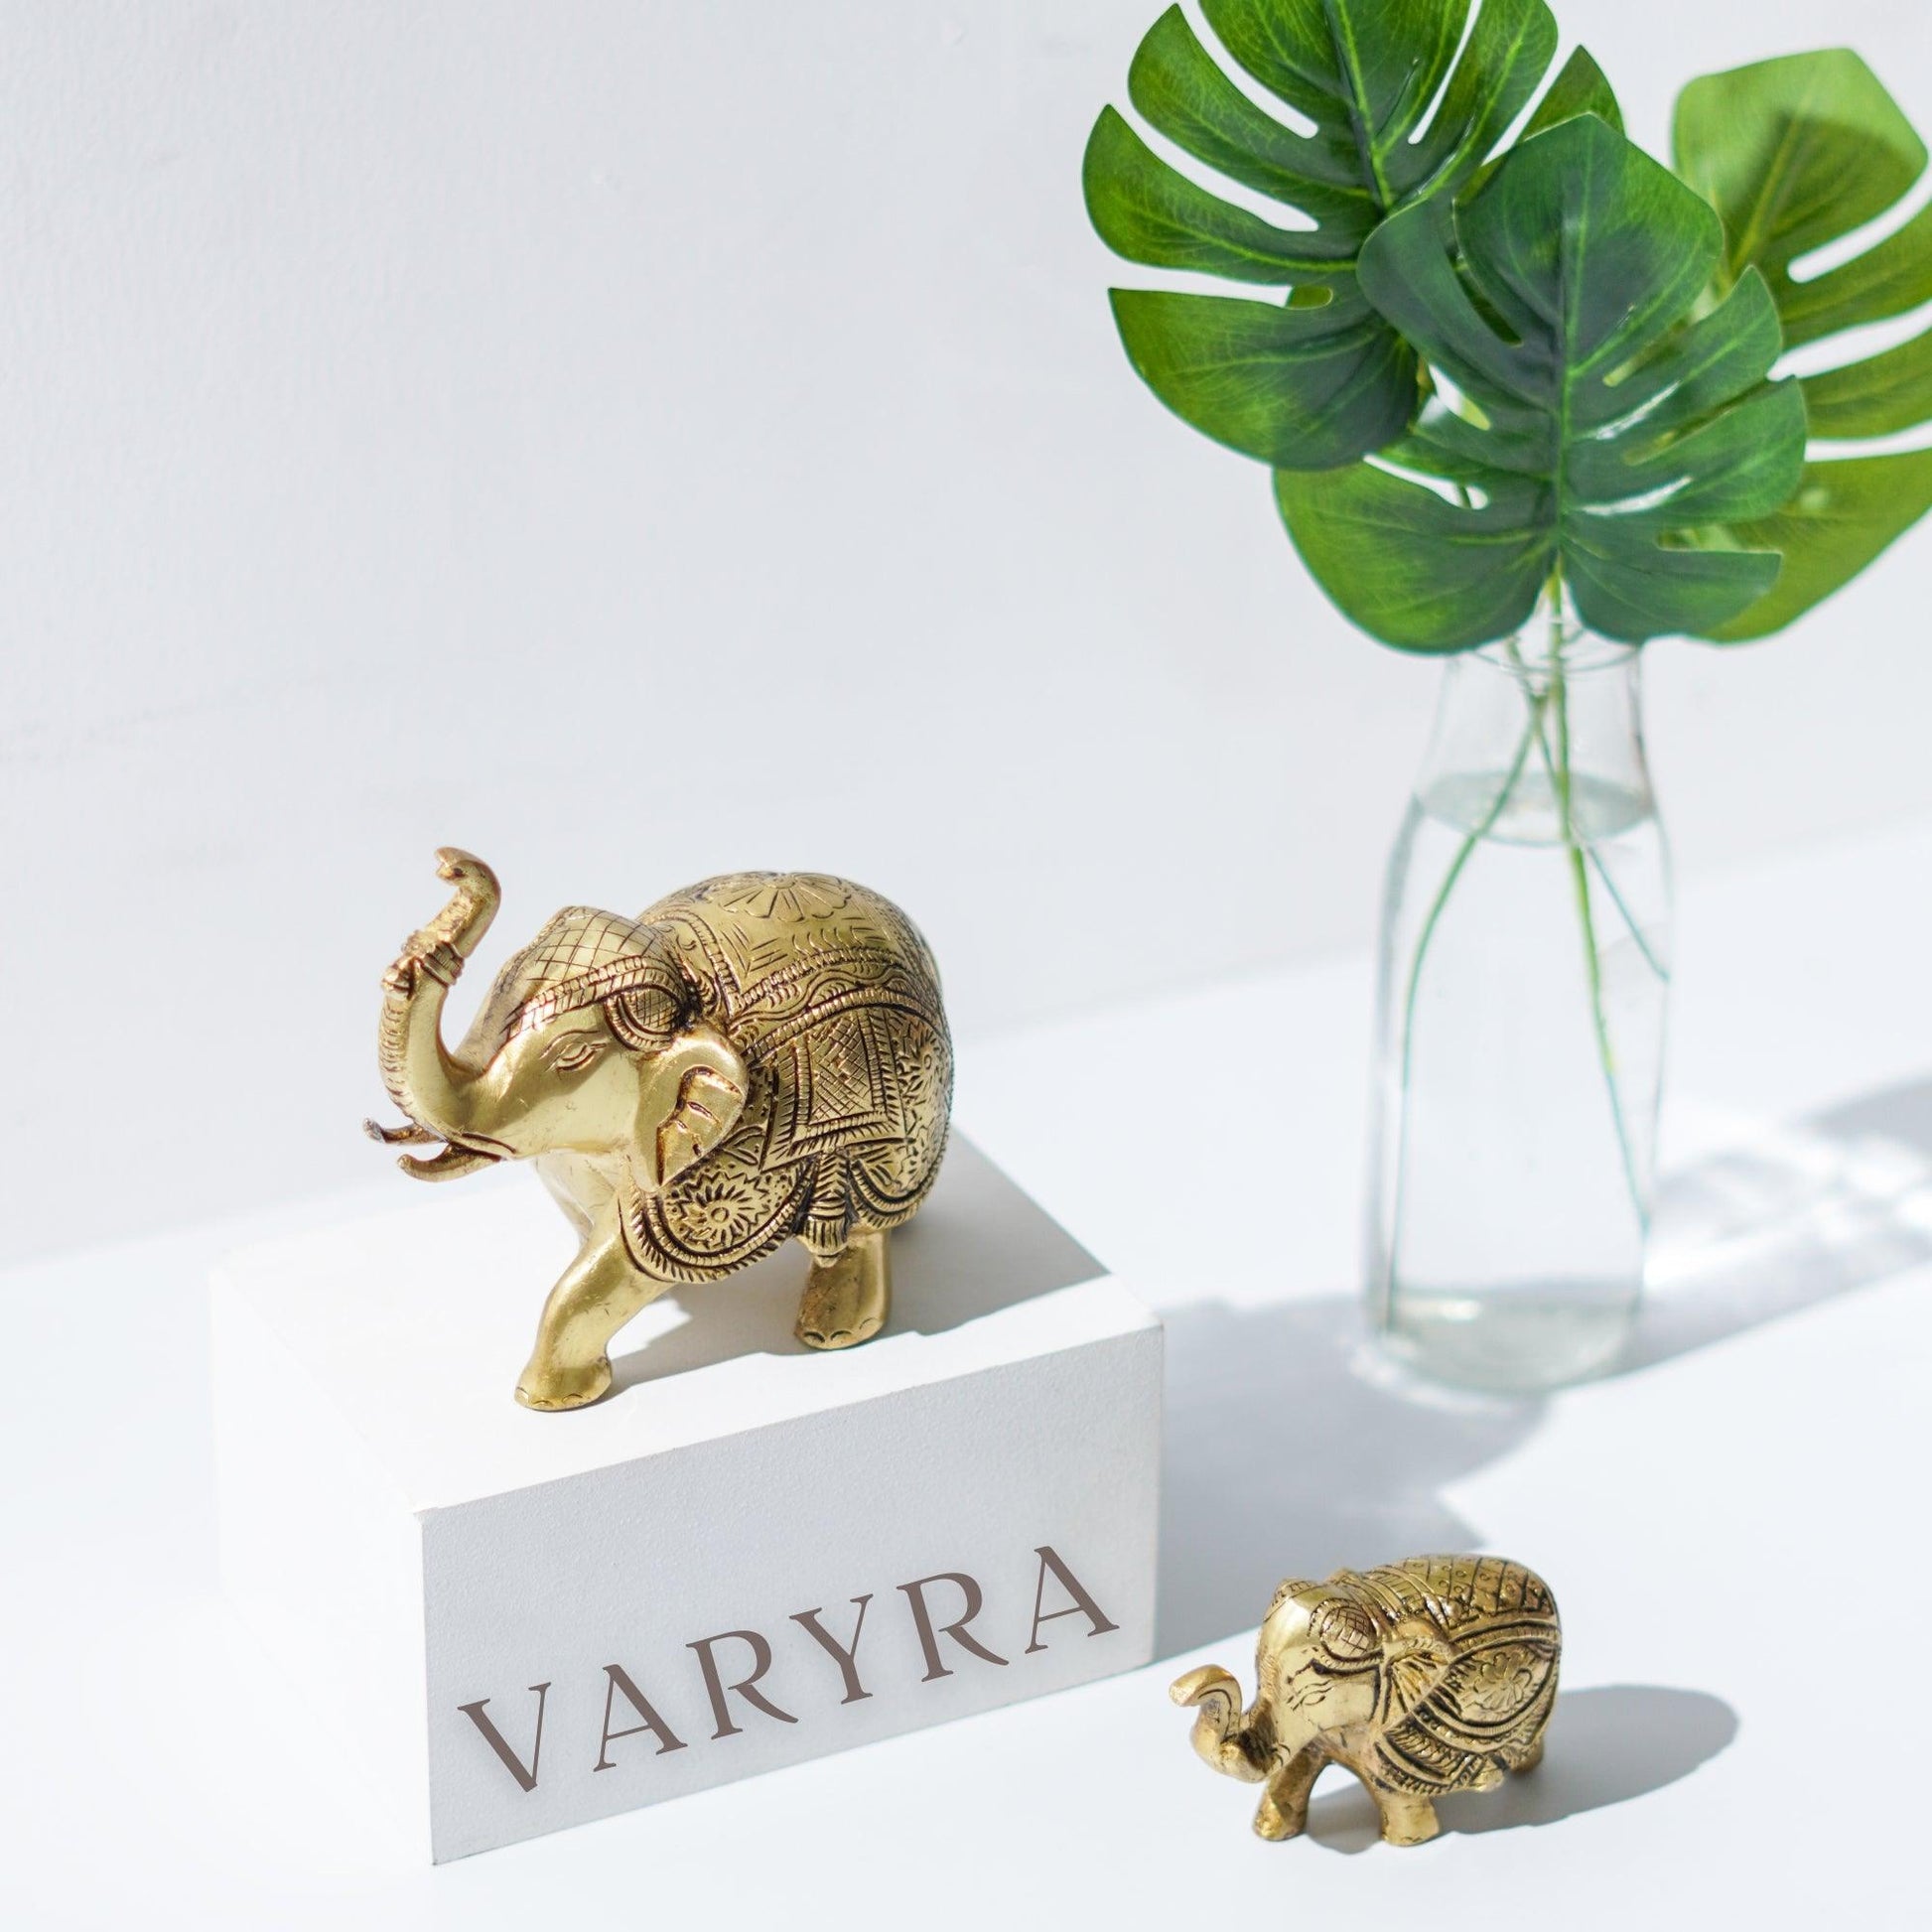 Buy Brass Home Decor Items online in India at VARYRA